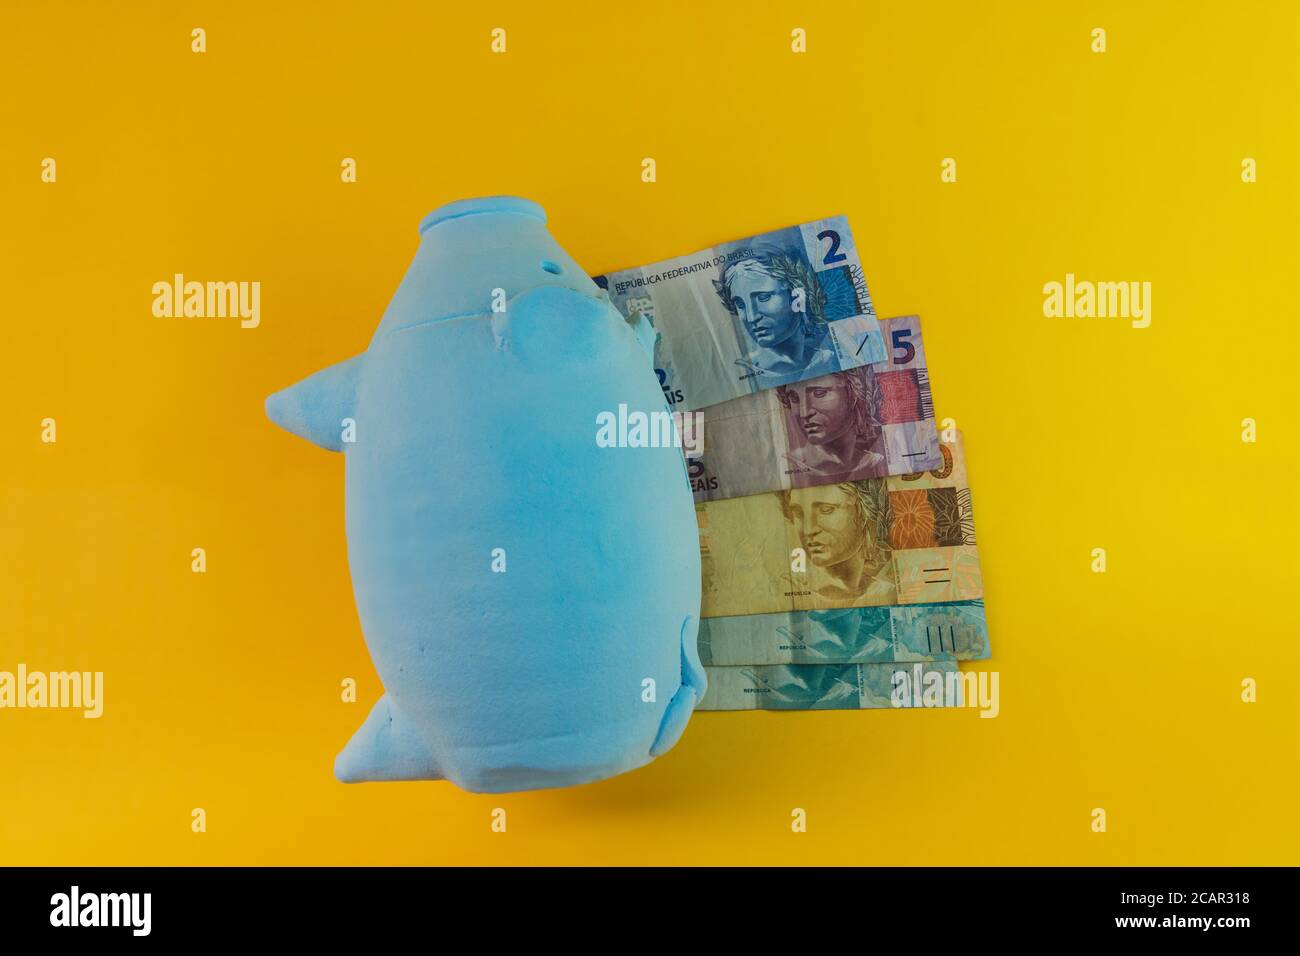 Piggy coins with calculator and brazilian money isolated. Stock Photo